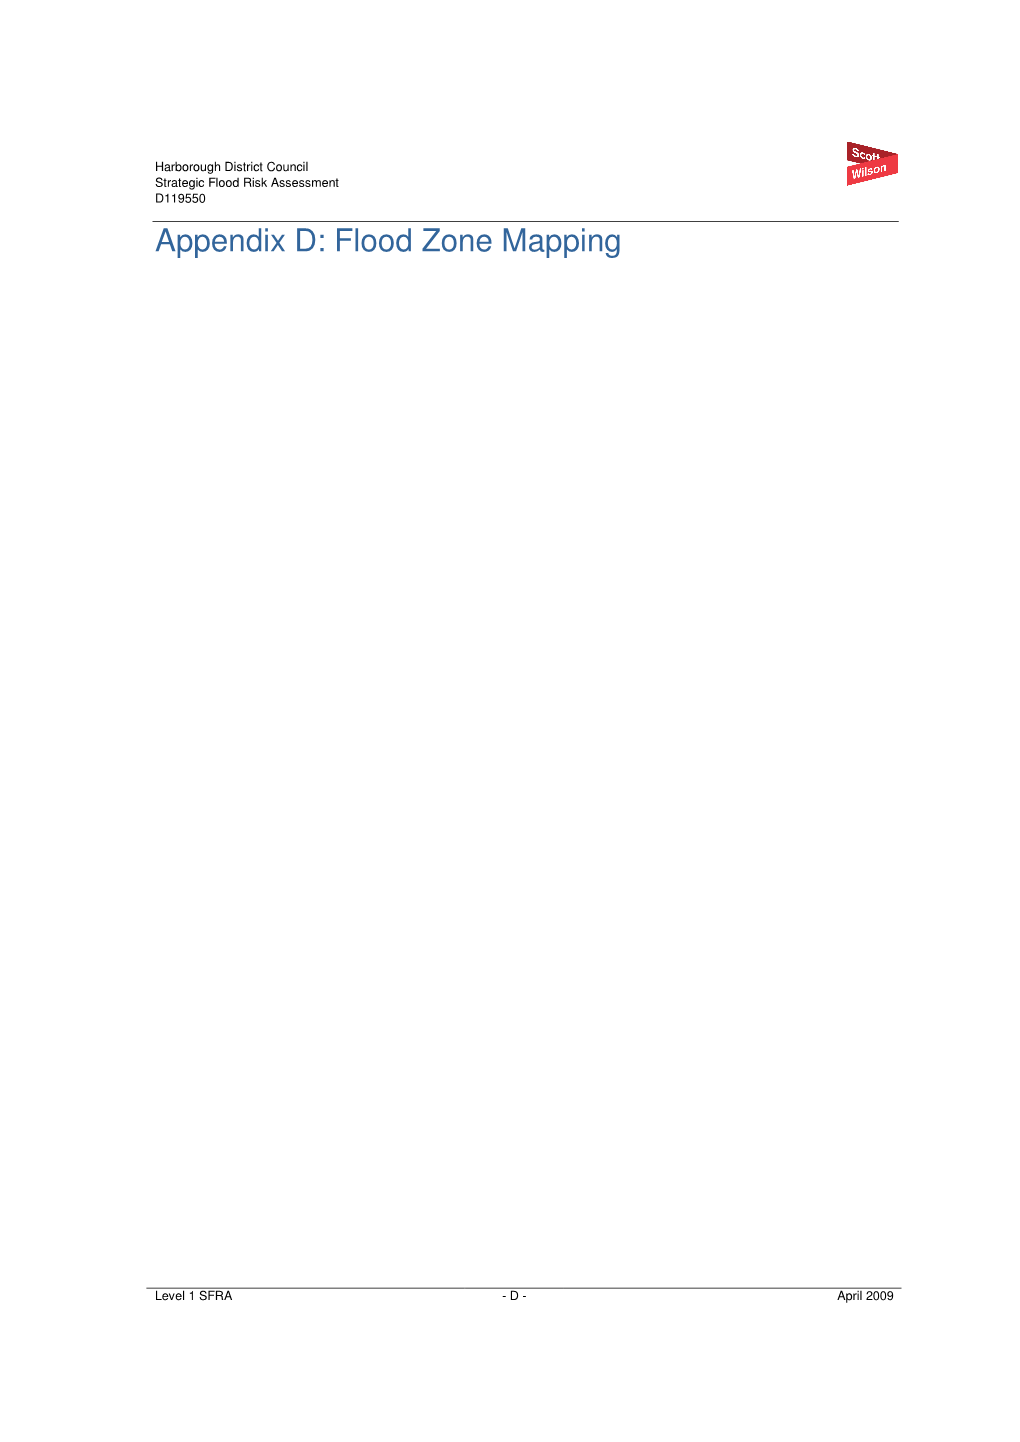 Appendix D: Flood Zone Mapping